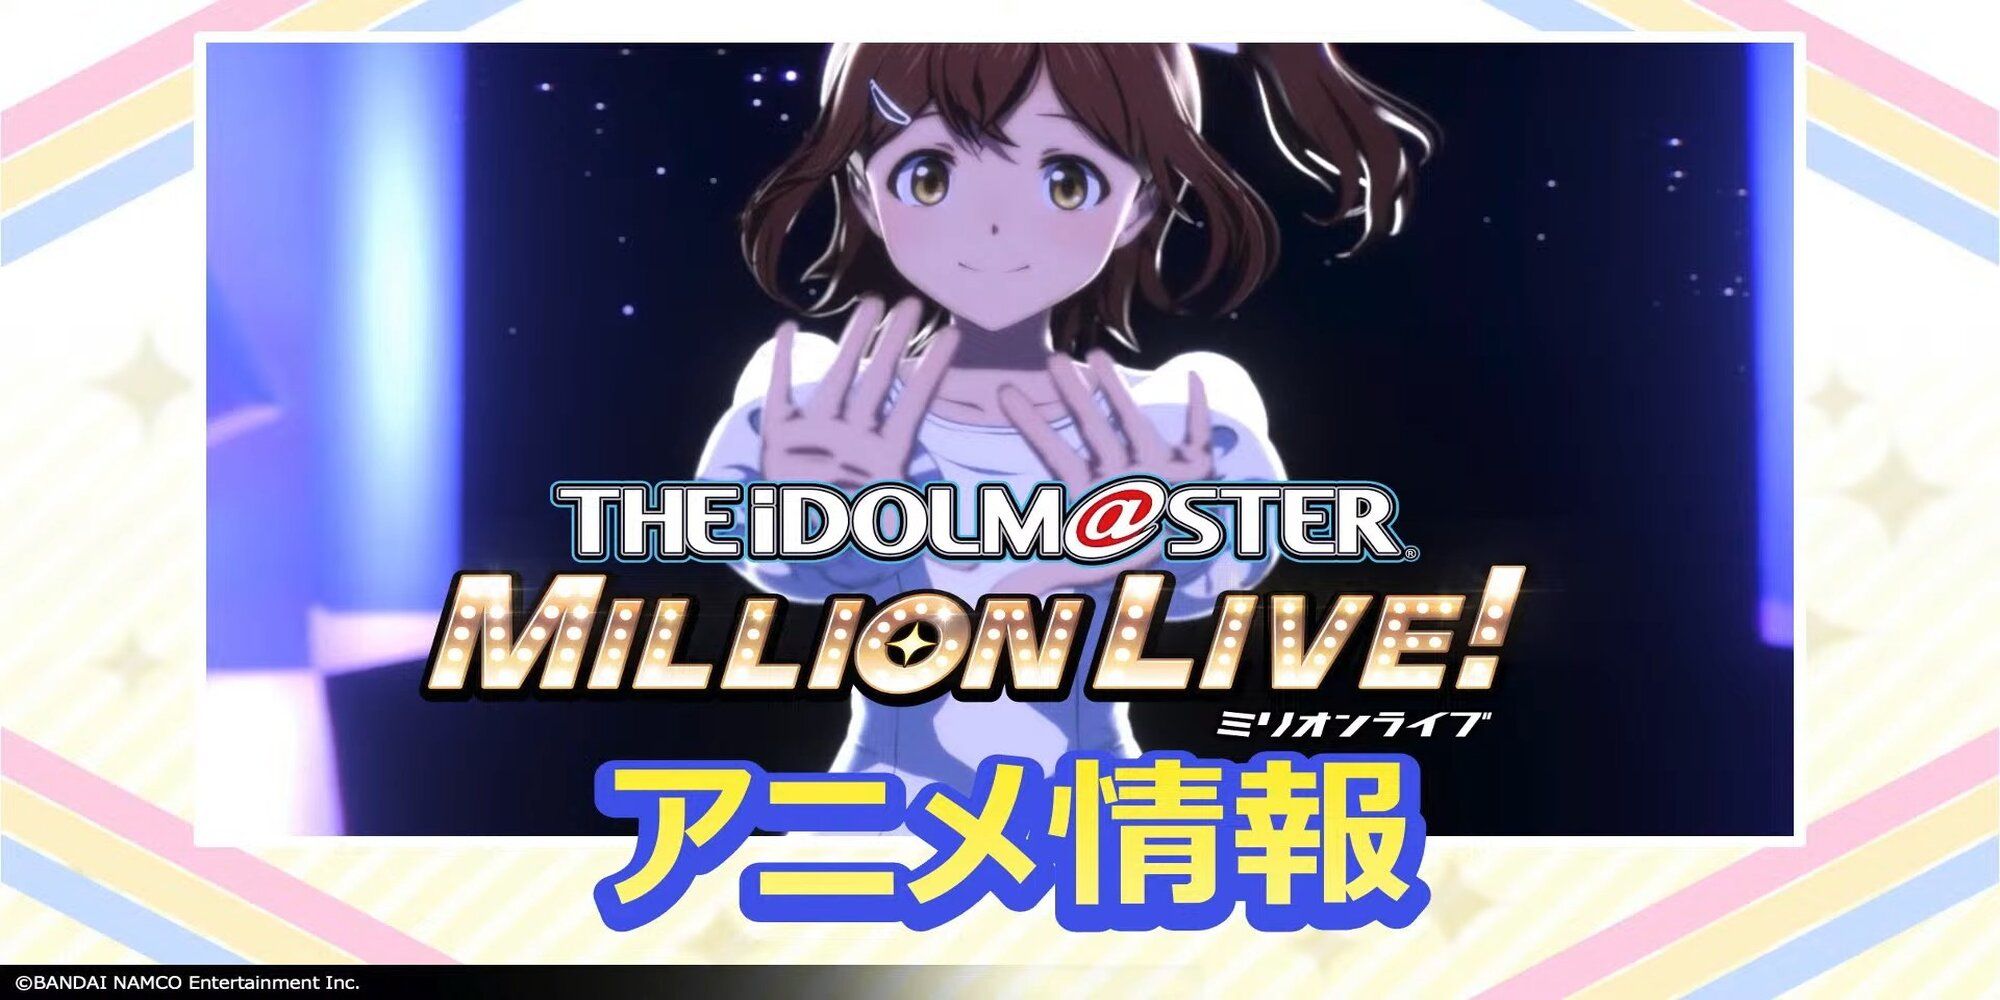 Mirai stands alone in IDOLM@STER Million Live! TV anime.